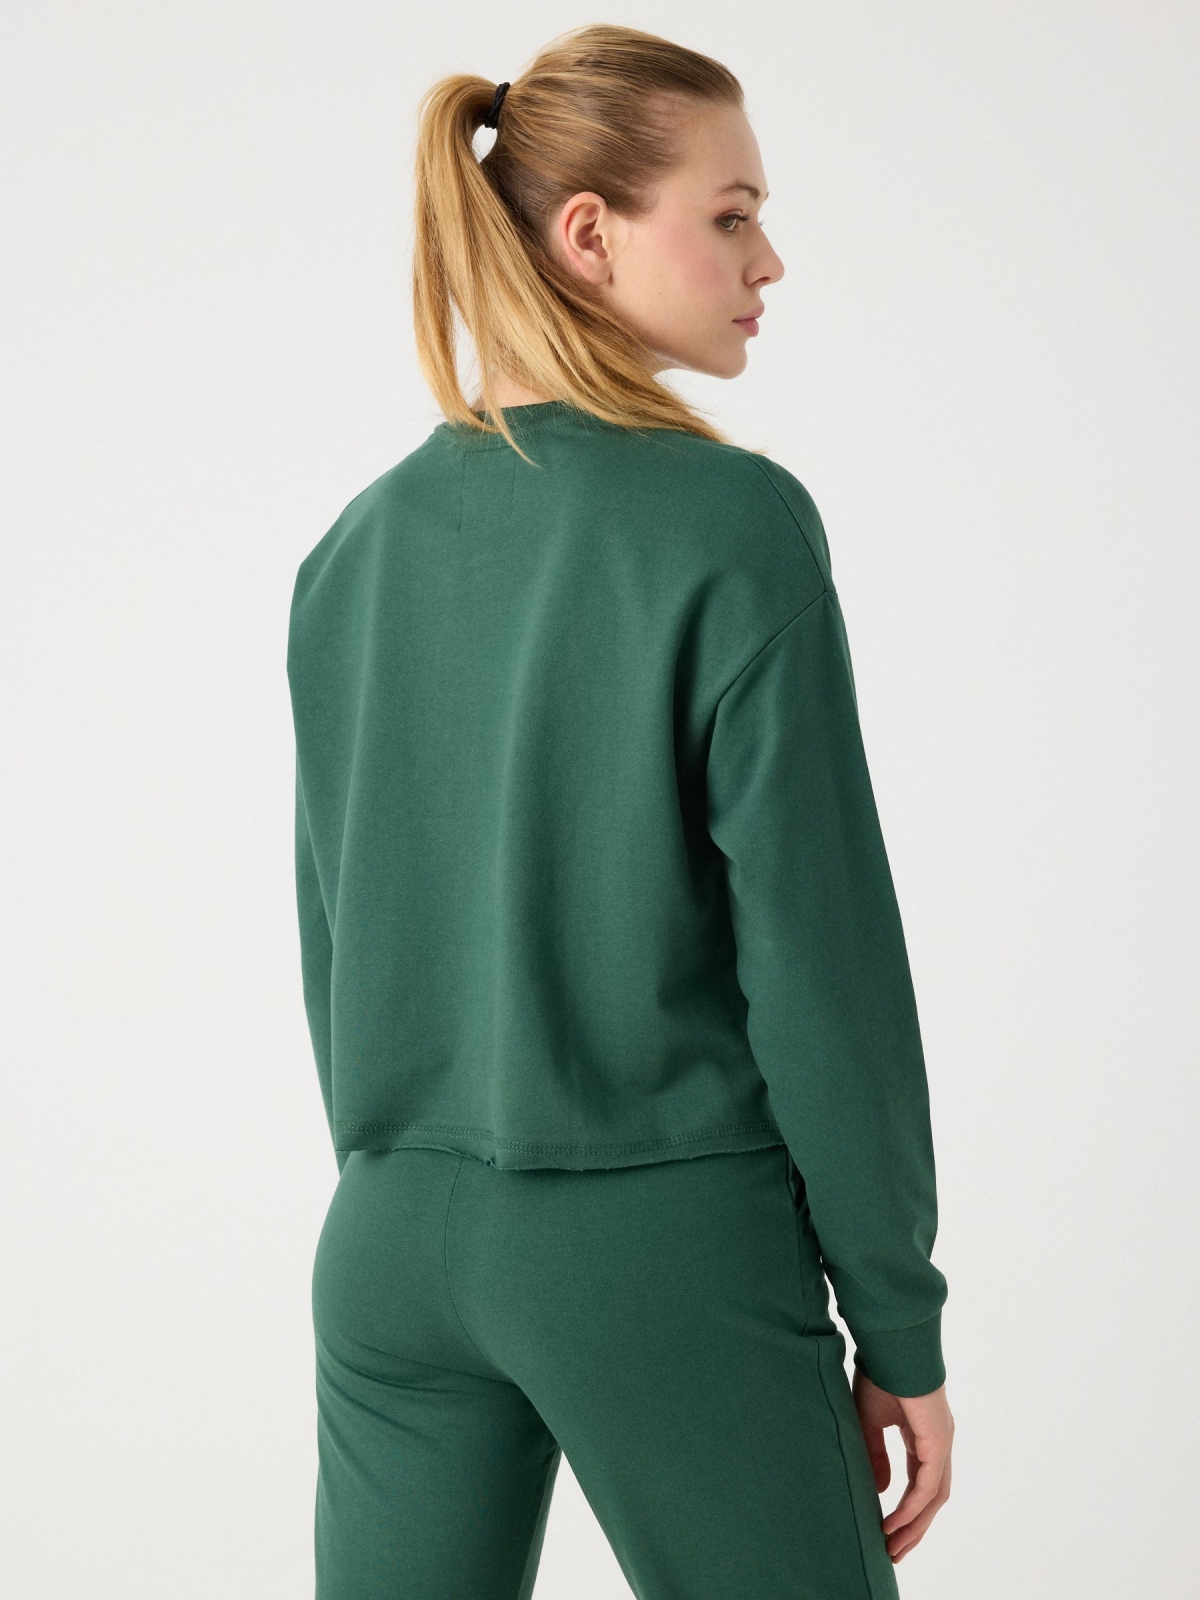 Cropped sweatshirt with print dark green middle back view